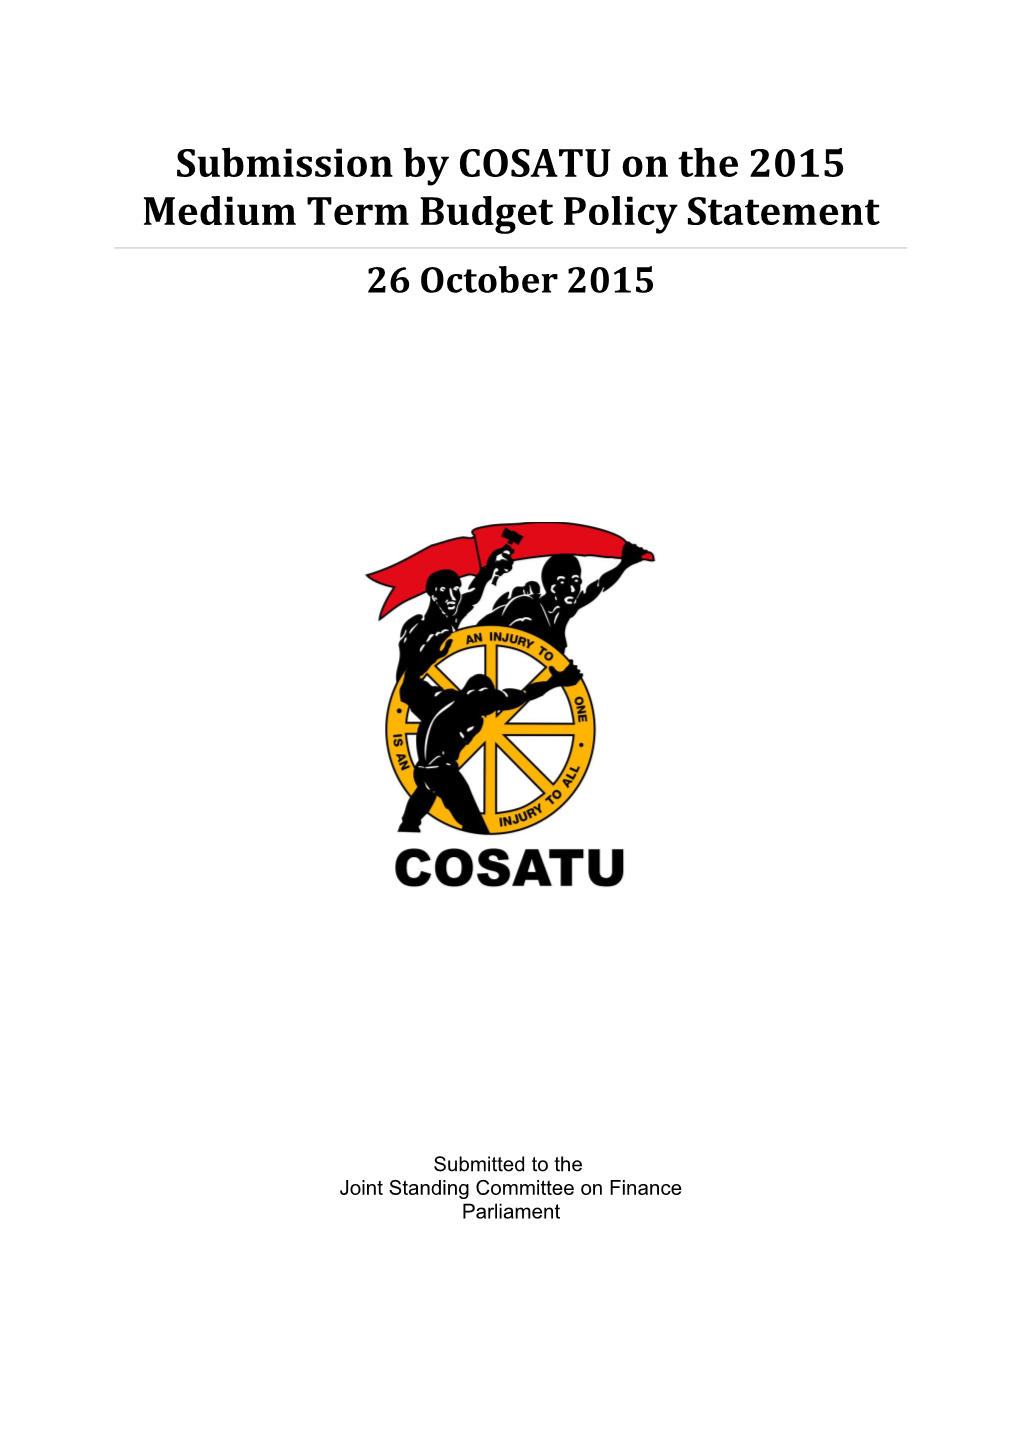 Submission by COSATU on the 2015 Medium Term Budget Policy Statement